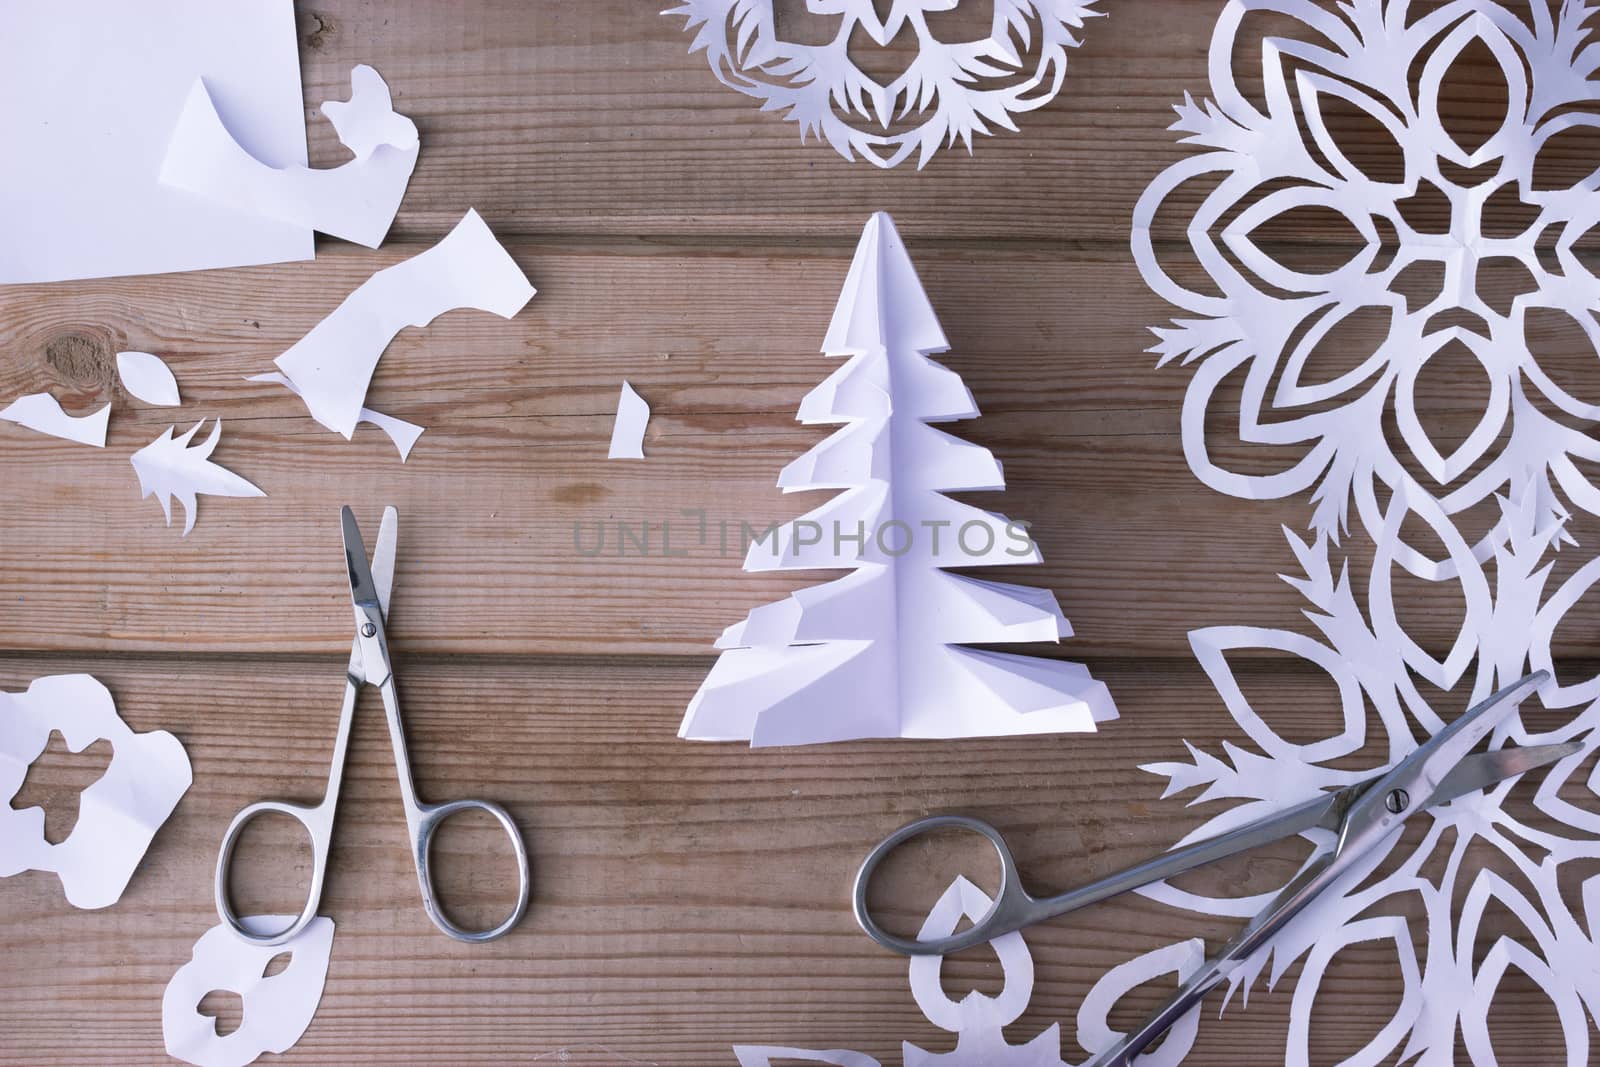 handmade paper snowflakes and scissors on wooden table, background